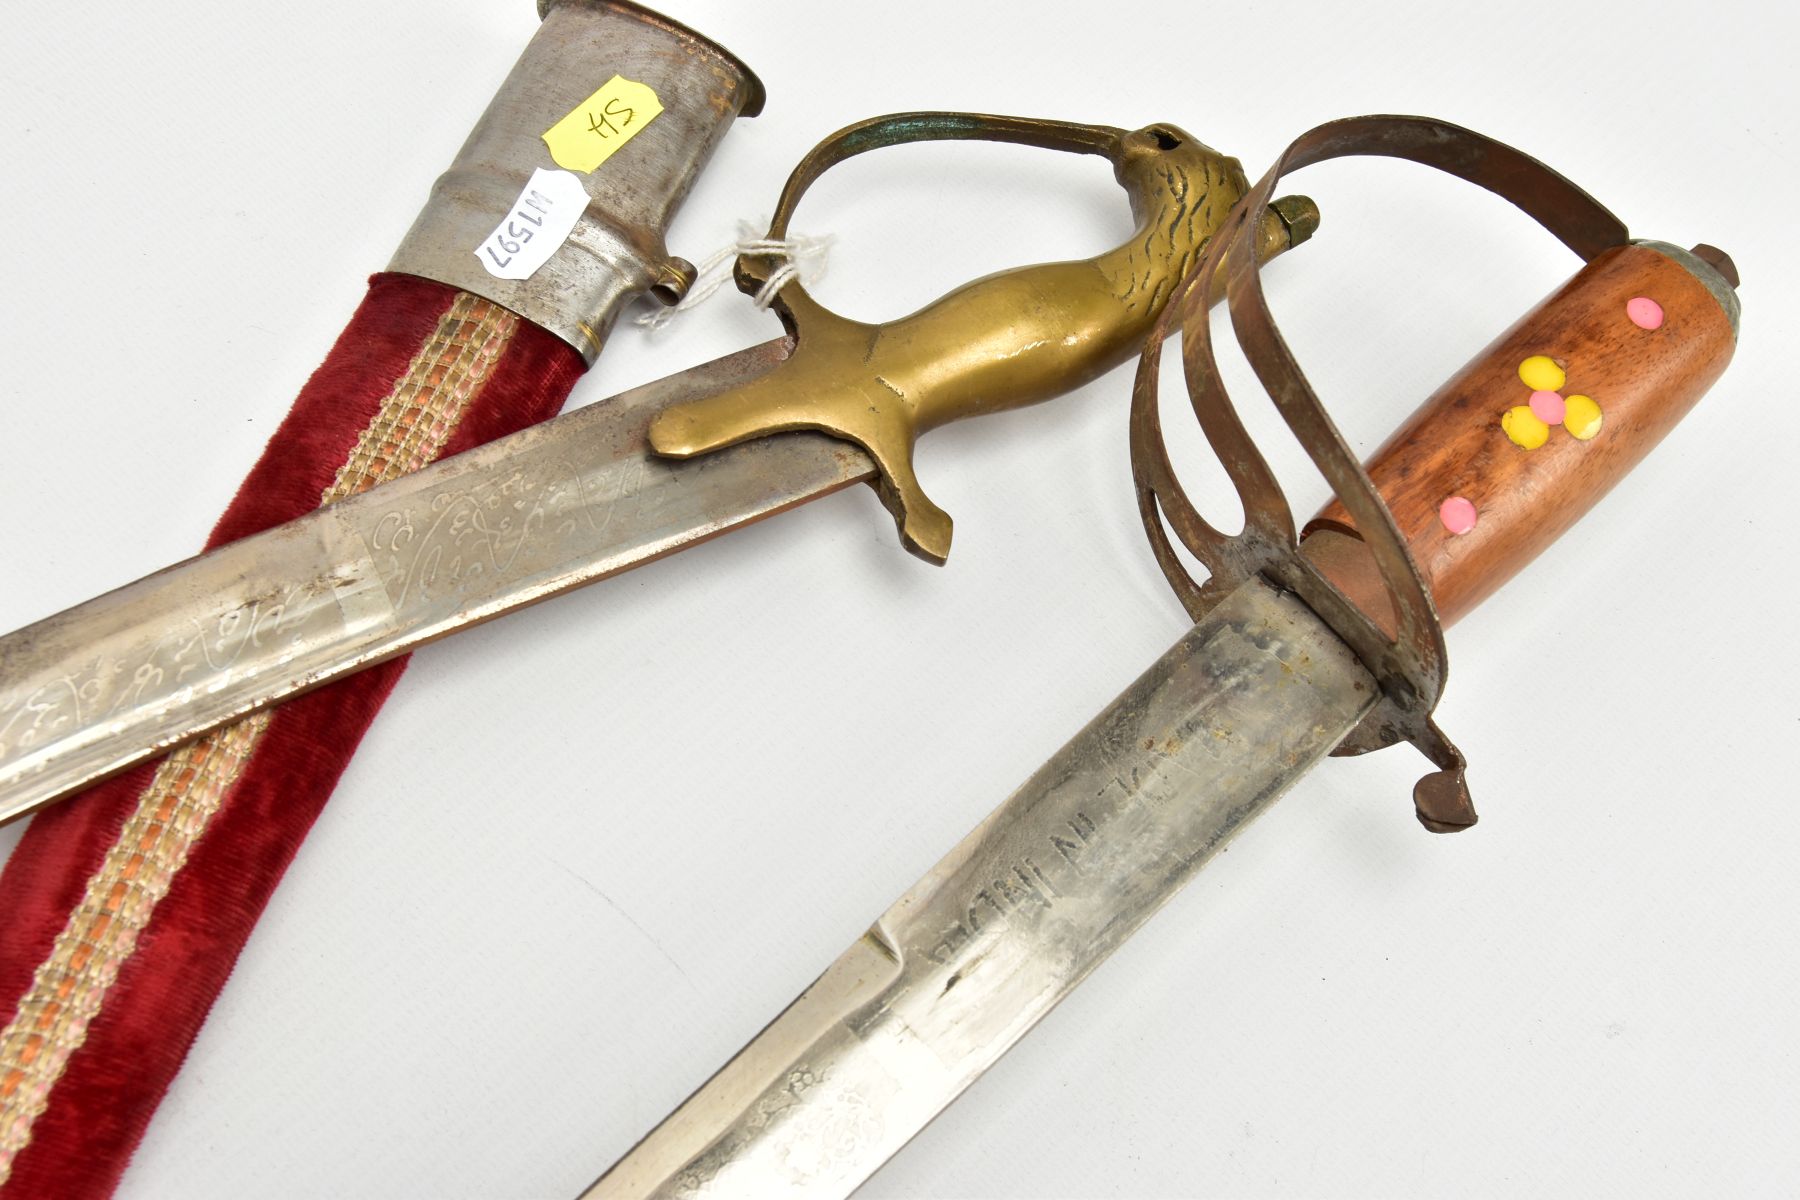 TWO ASIAN/INDIAN TOURIST STYLE CURVED SWORDS in wooden and suede scabbards, one id marked made in - Image 6 of 13